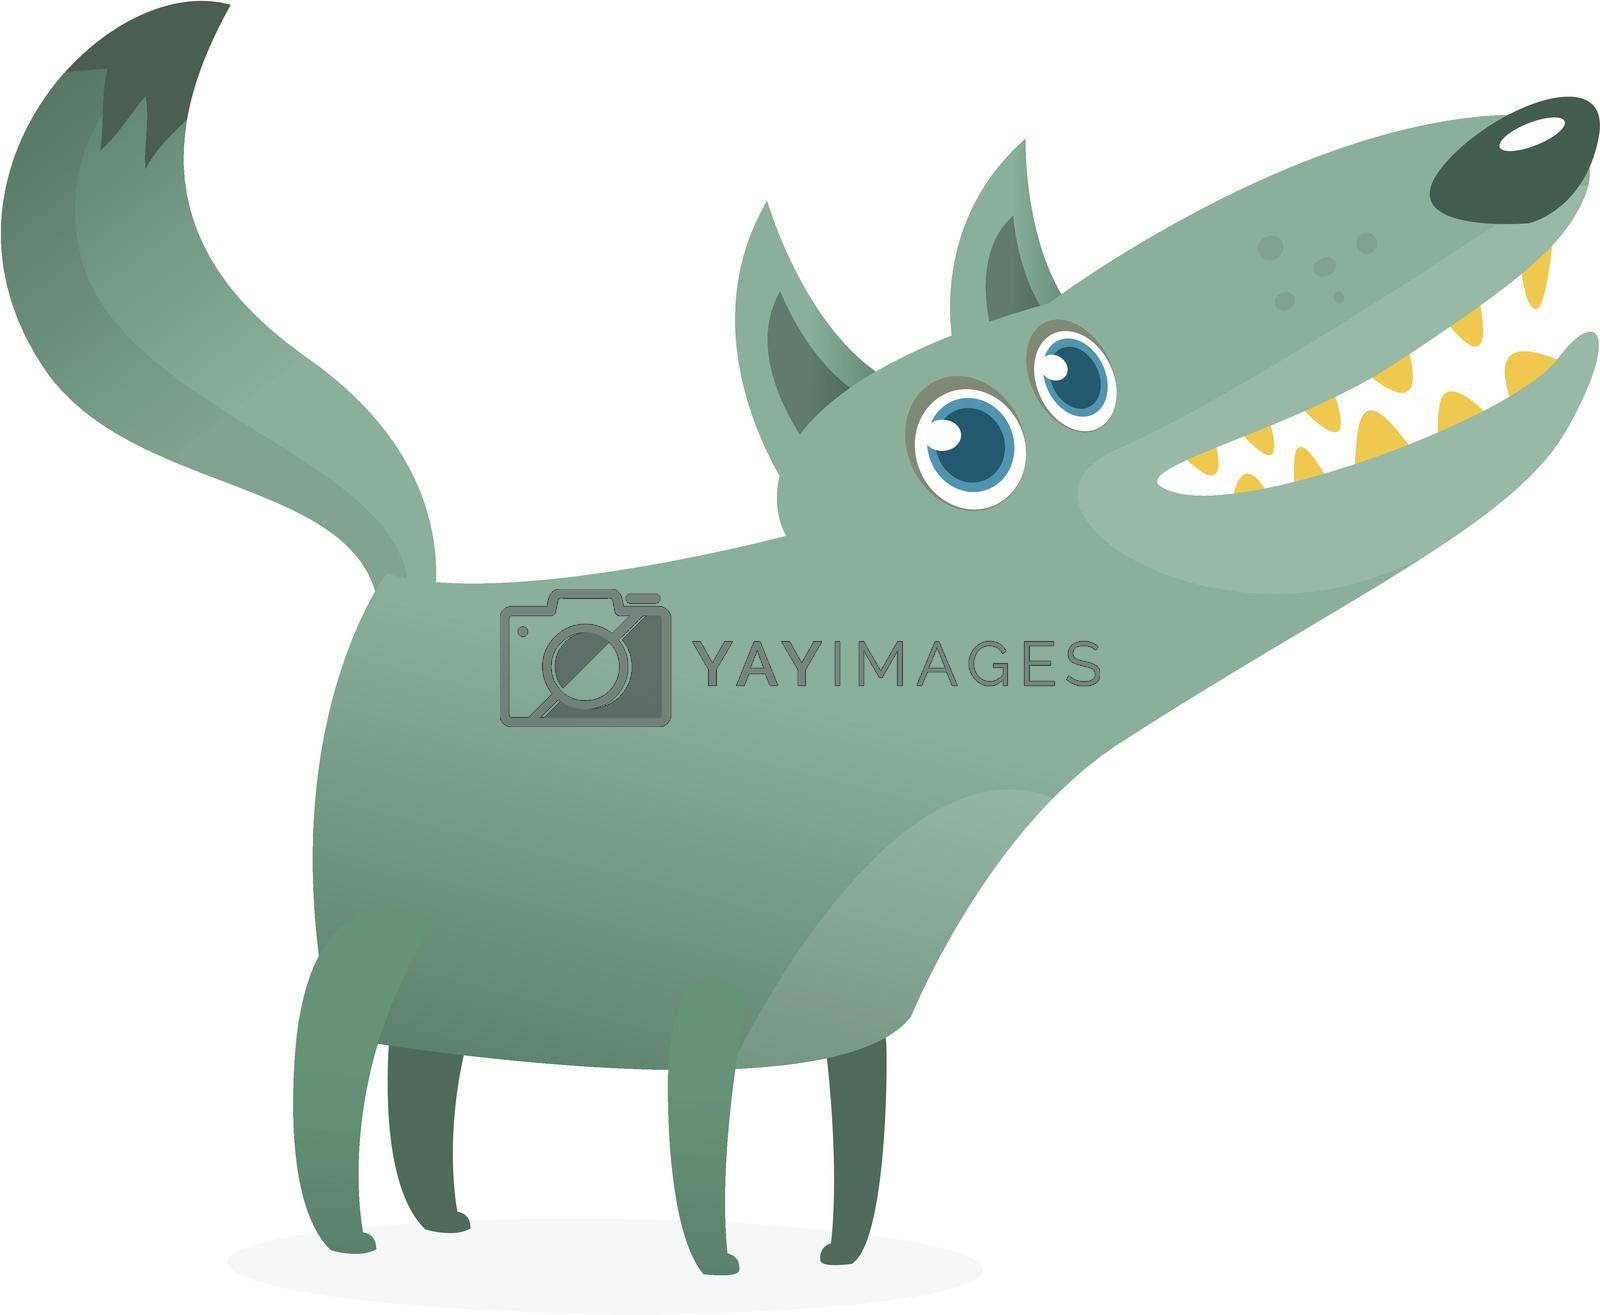 Royalty free image of Funny cartoon wolf. Vector illustration by drawkman